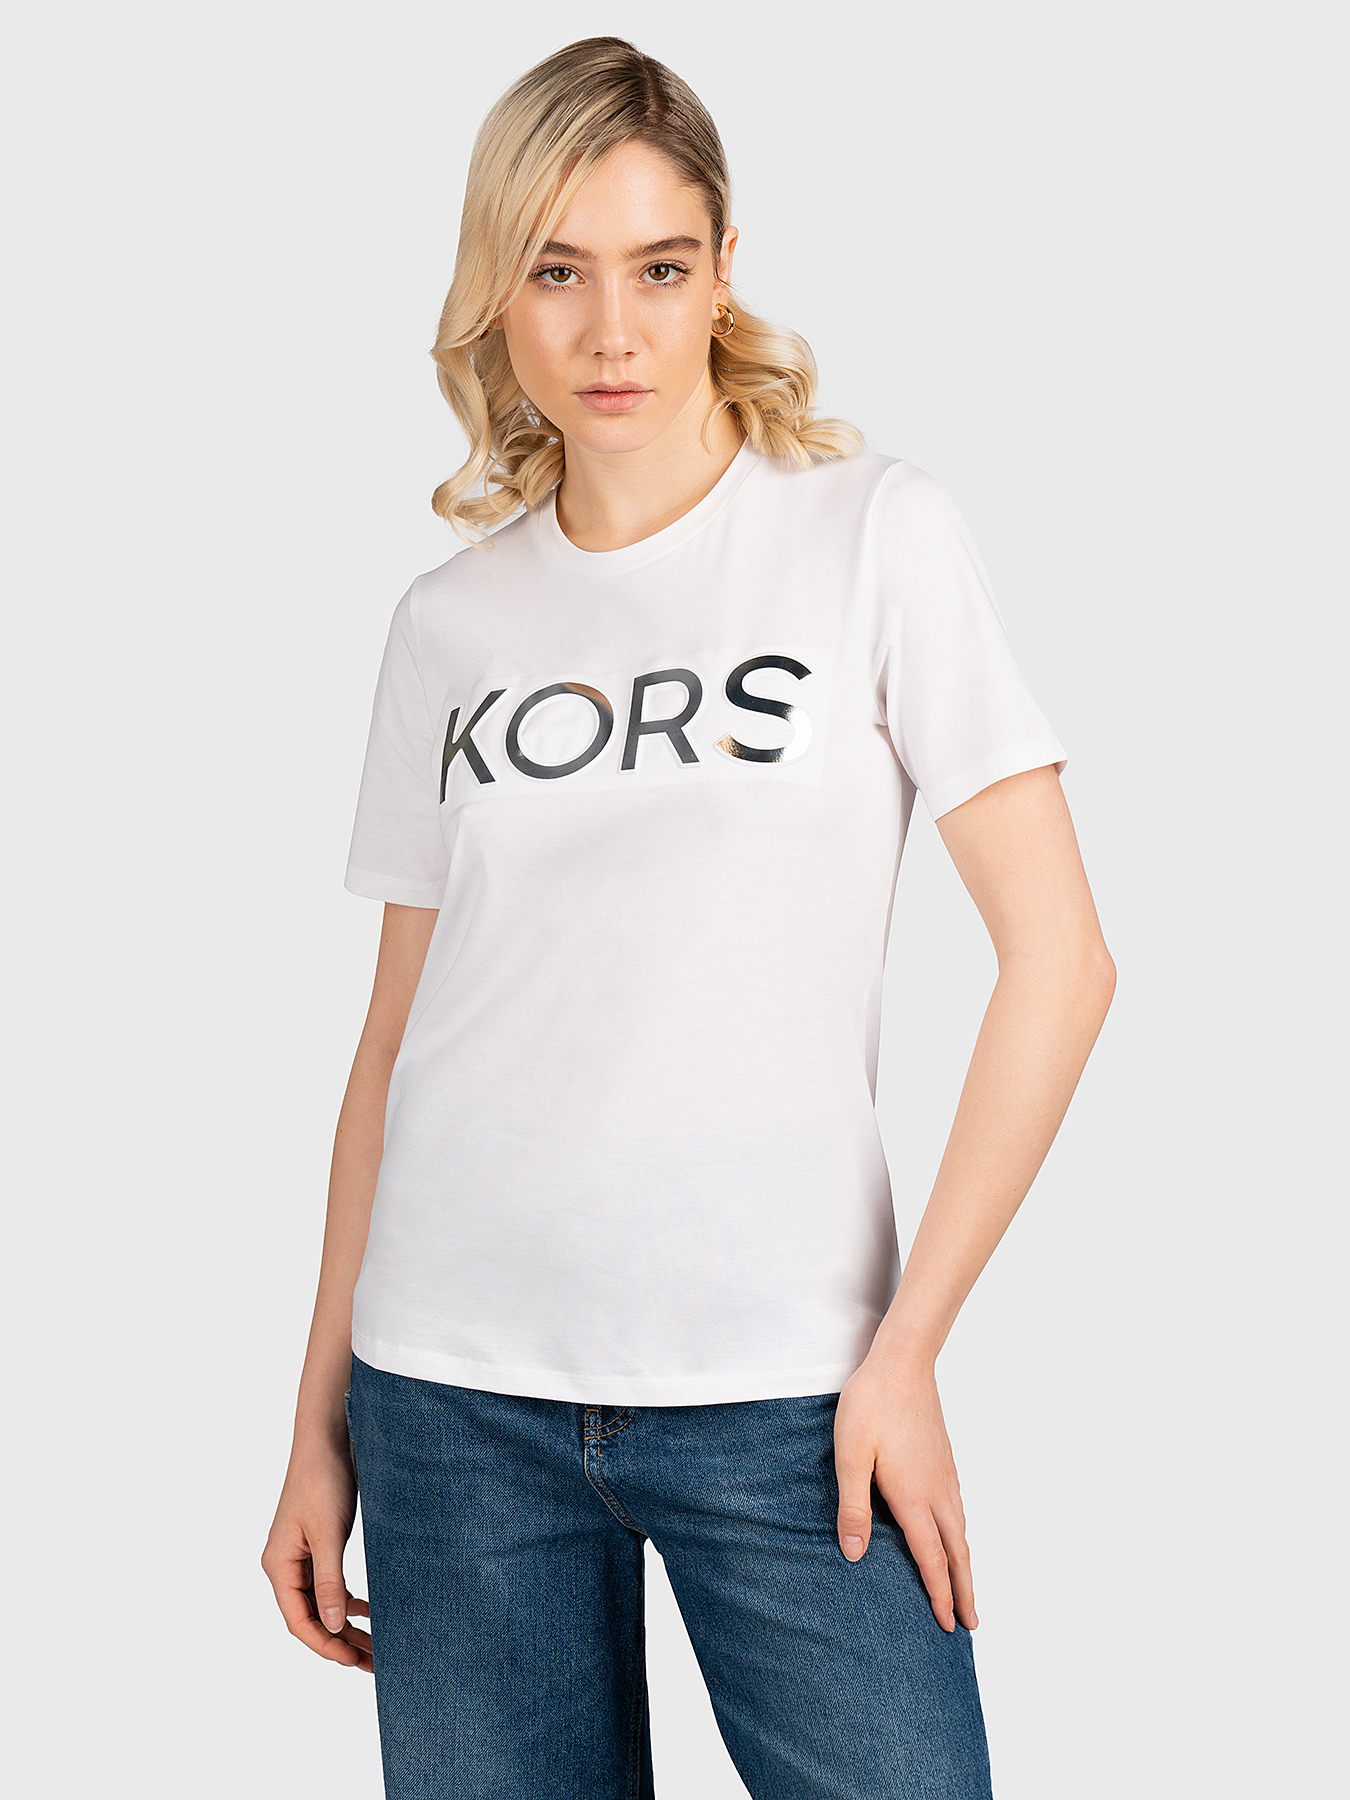 Michael Kors White Kors Spill TShirt  Designerwear  Signup for an  Exclusive Discount Code